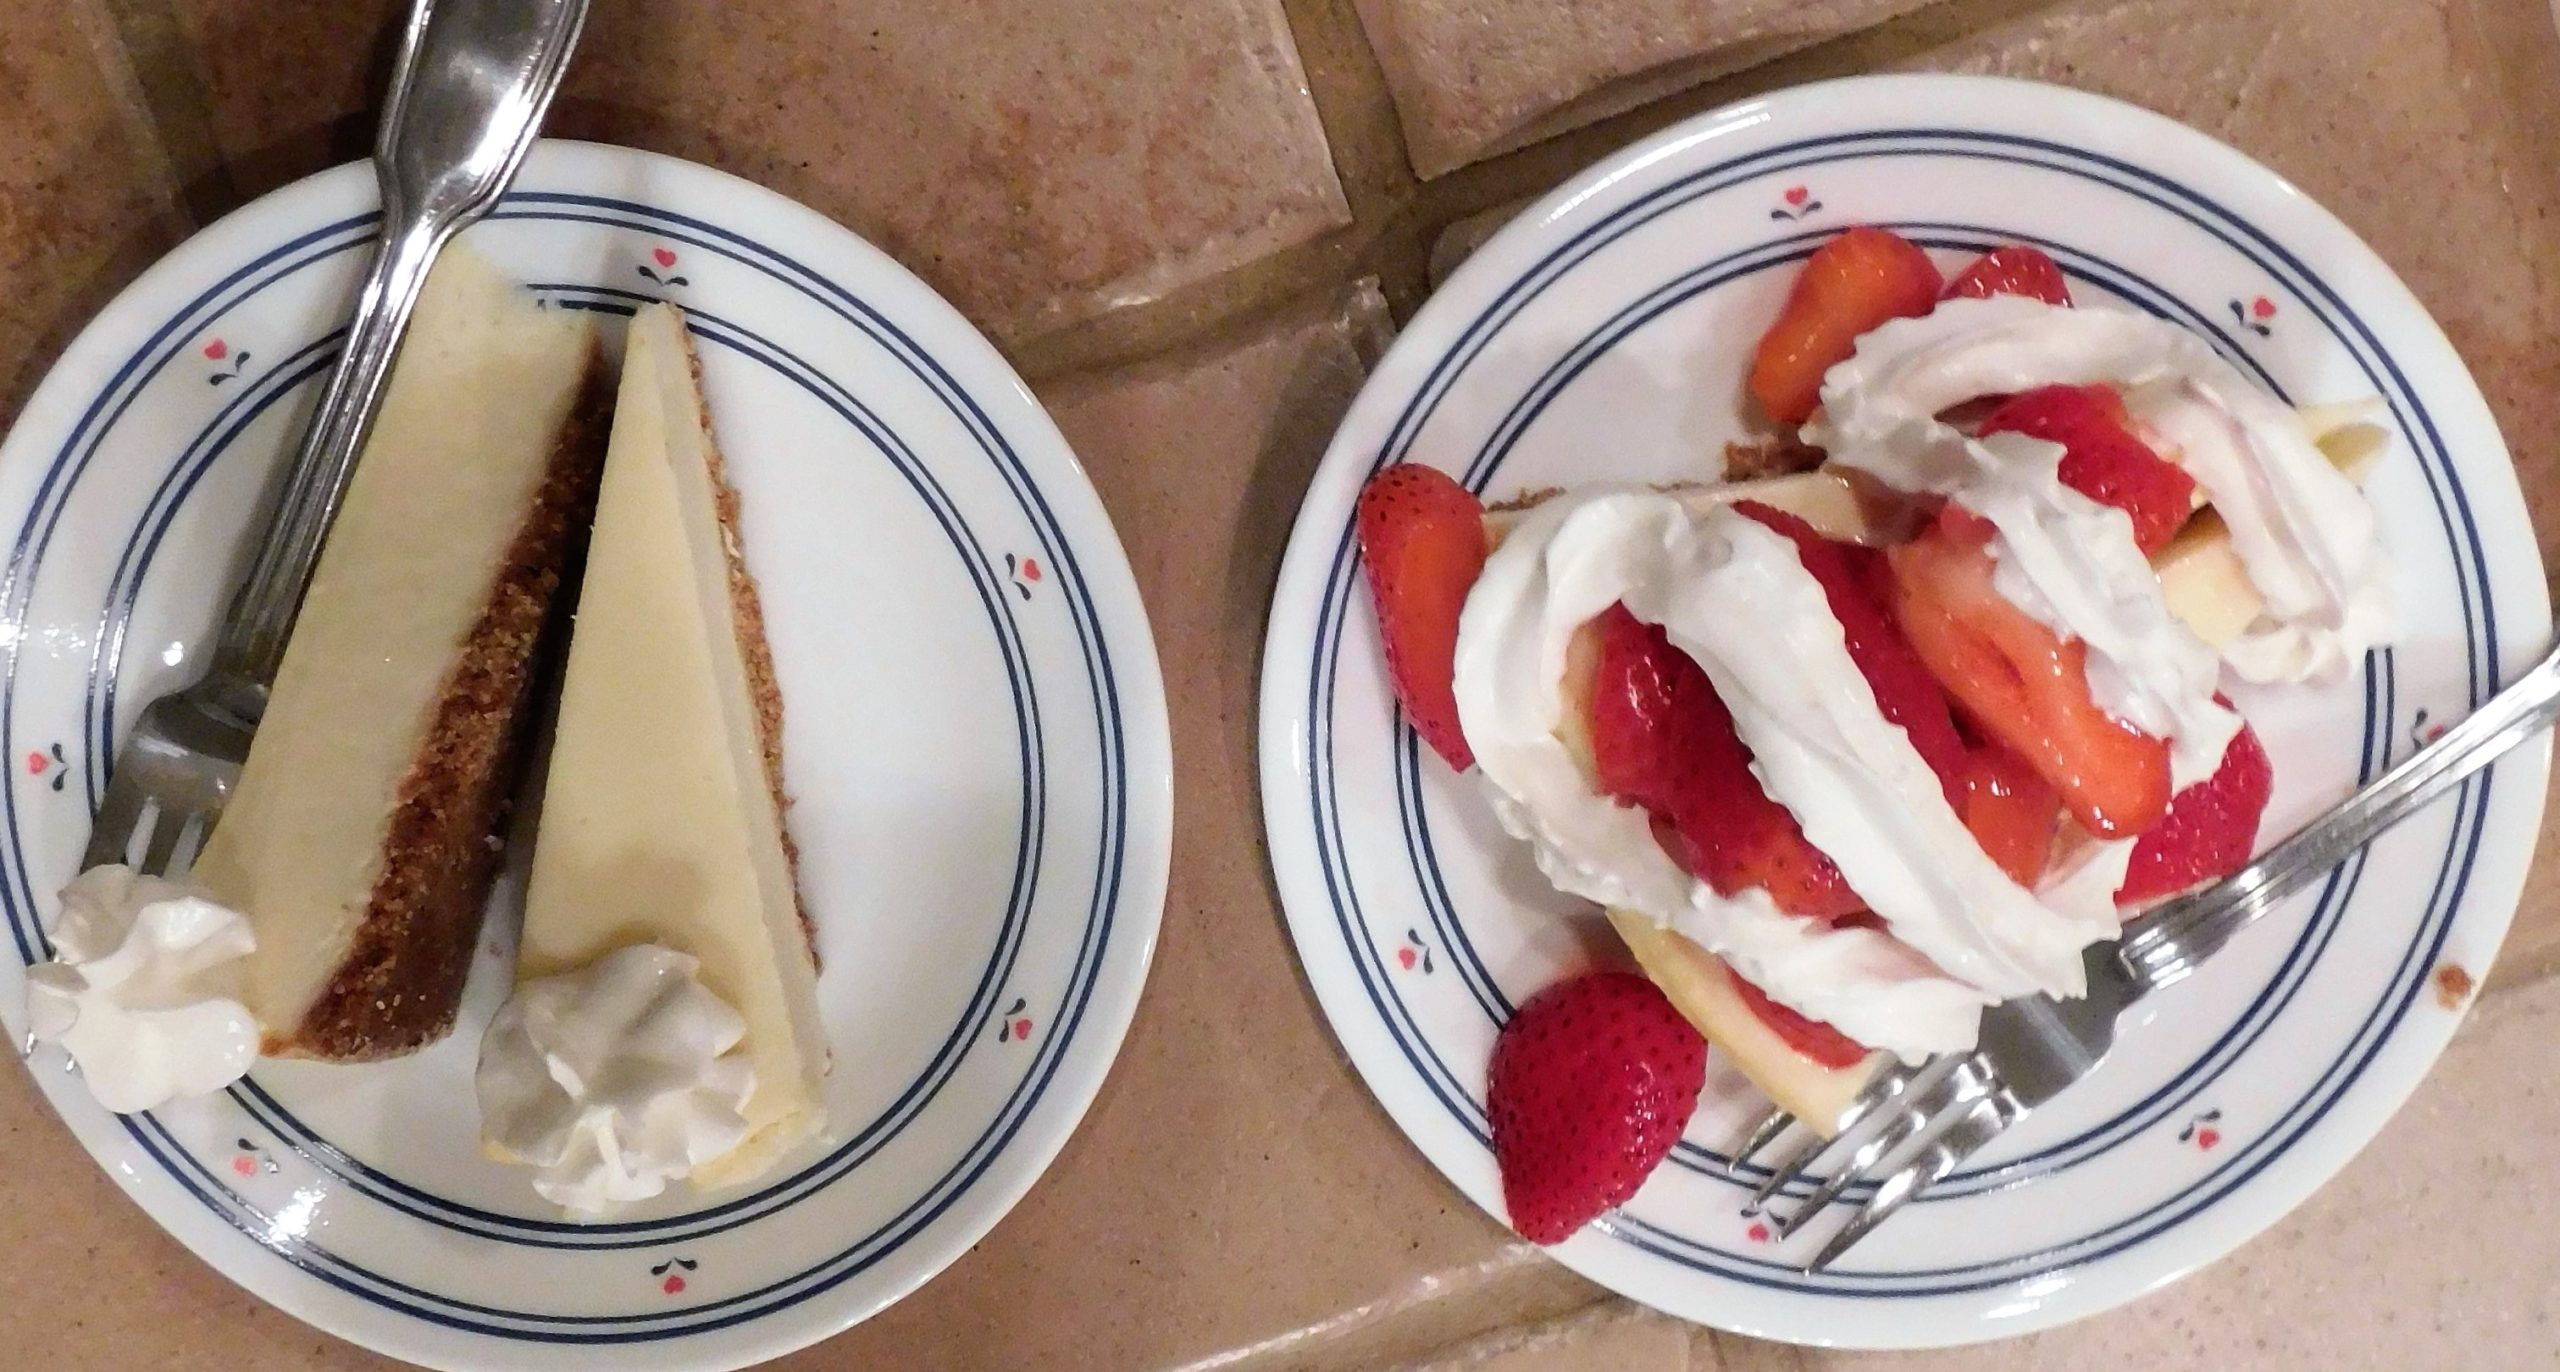 national-cheesecake-day-is-july-30th-a-delicious-dessert-that-is-loved-by-millions-around-the-it-is_t20_QaVJLy